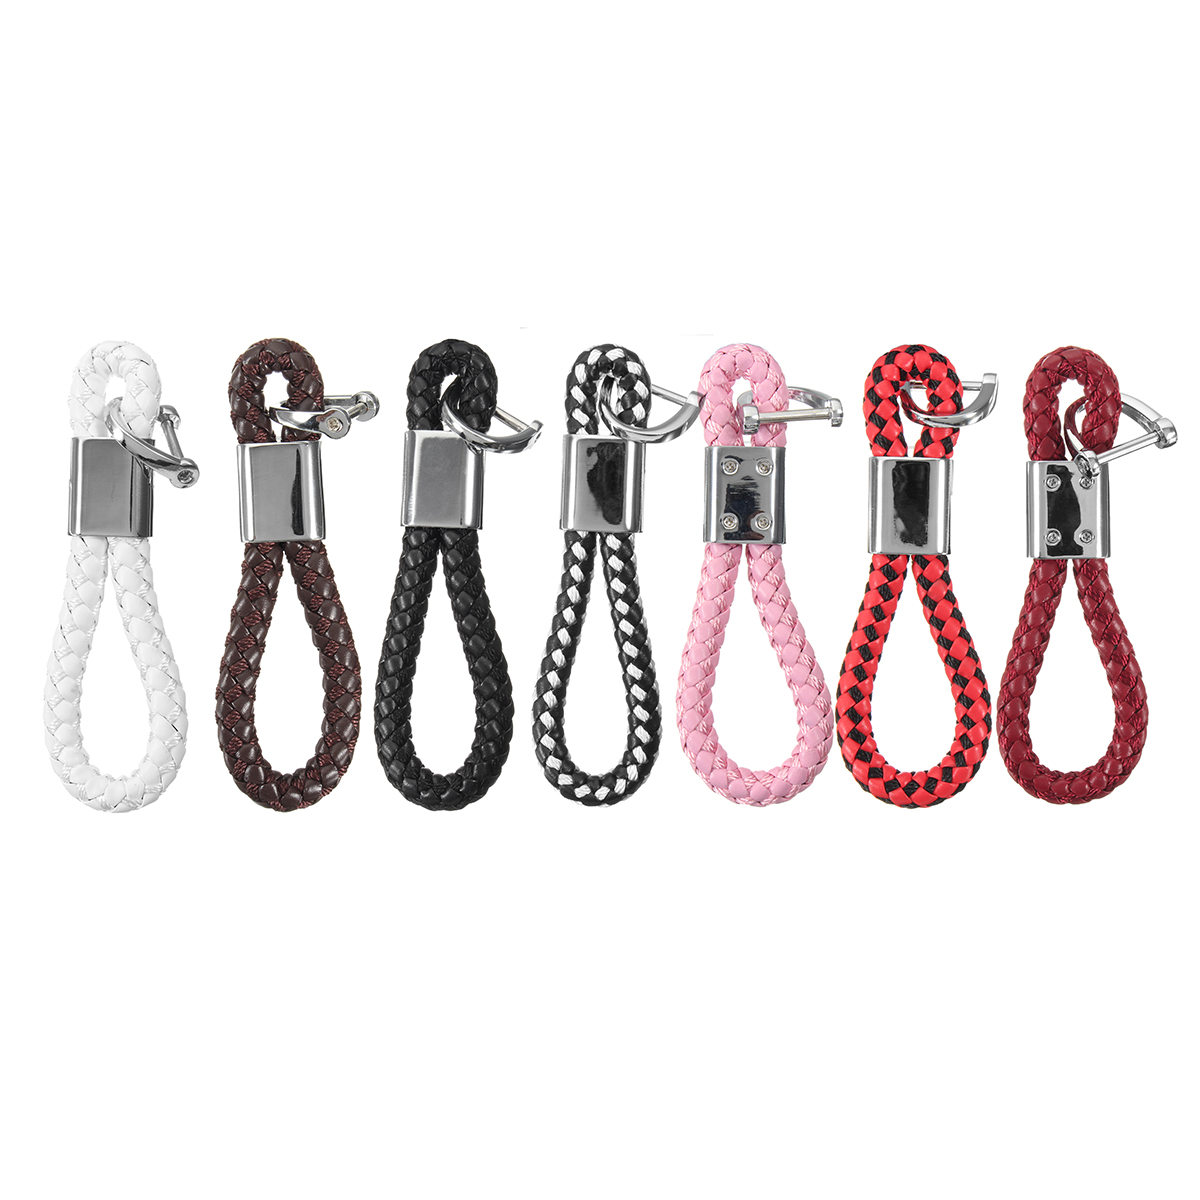 PU-Leather-Braided-Strap-Key-Chain-Stainless-Key-ring-7-Different-Colors-1191604-4